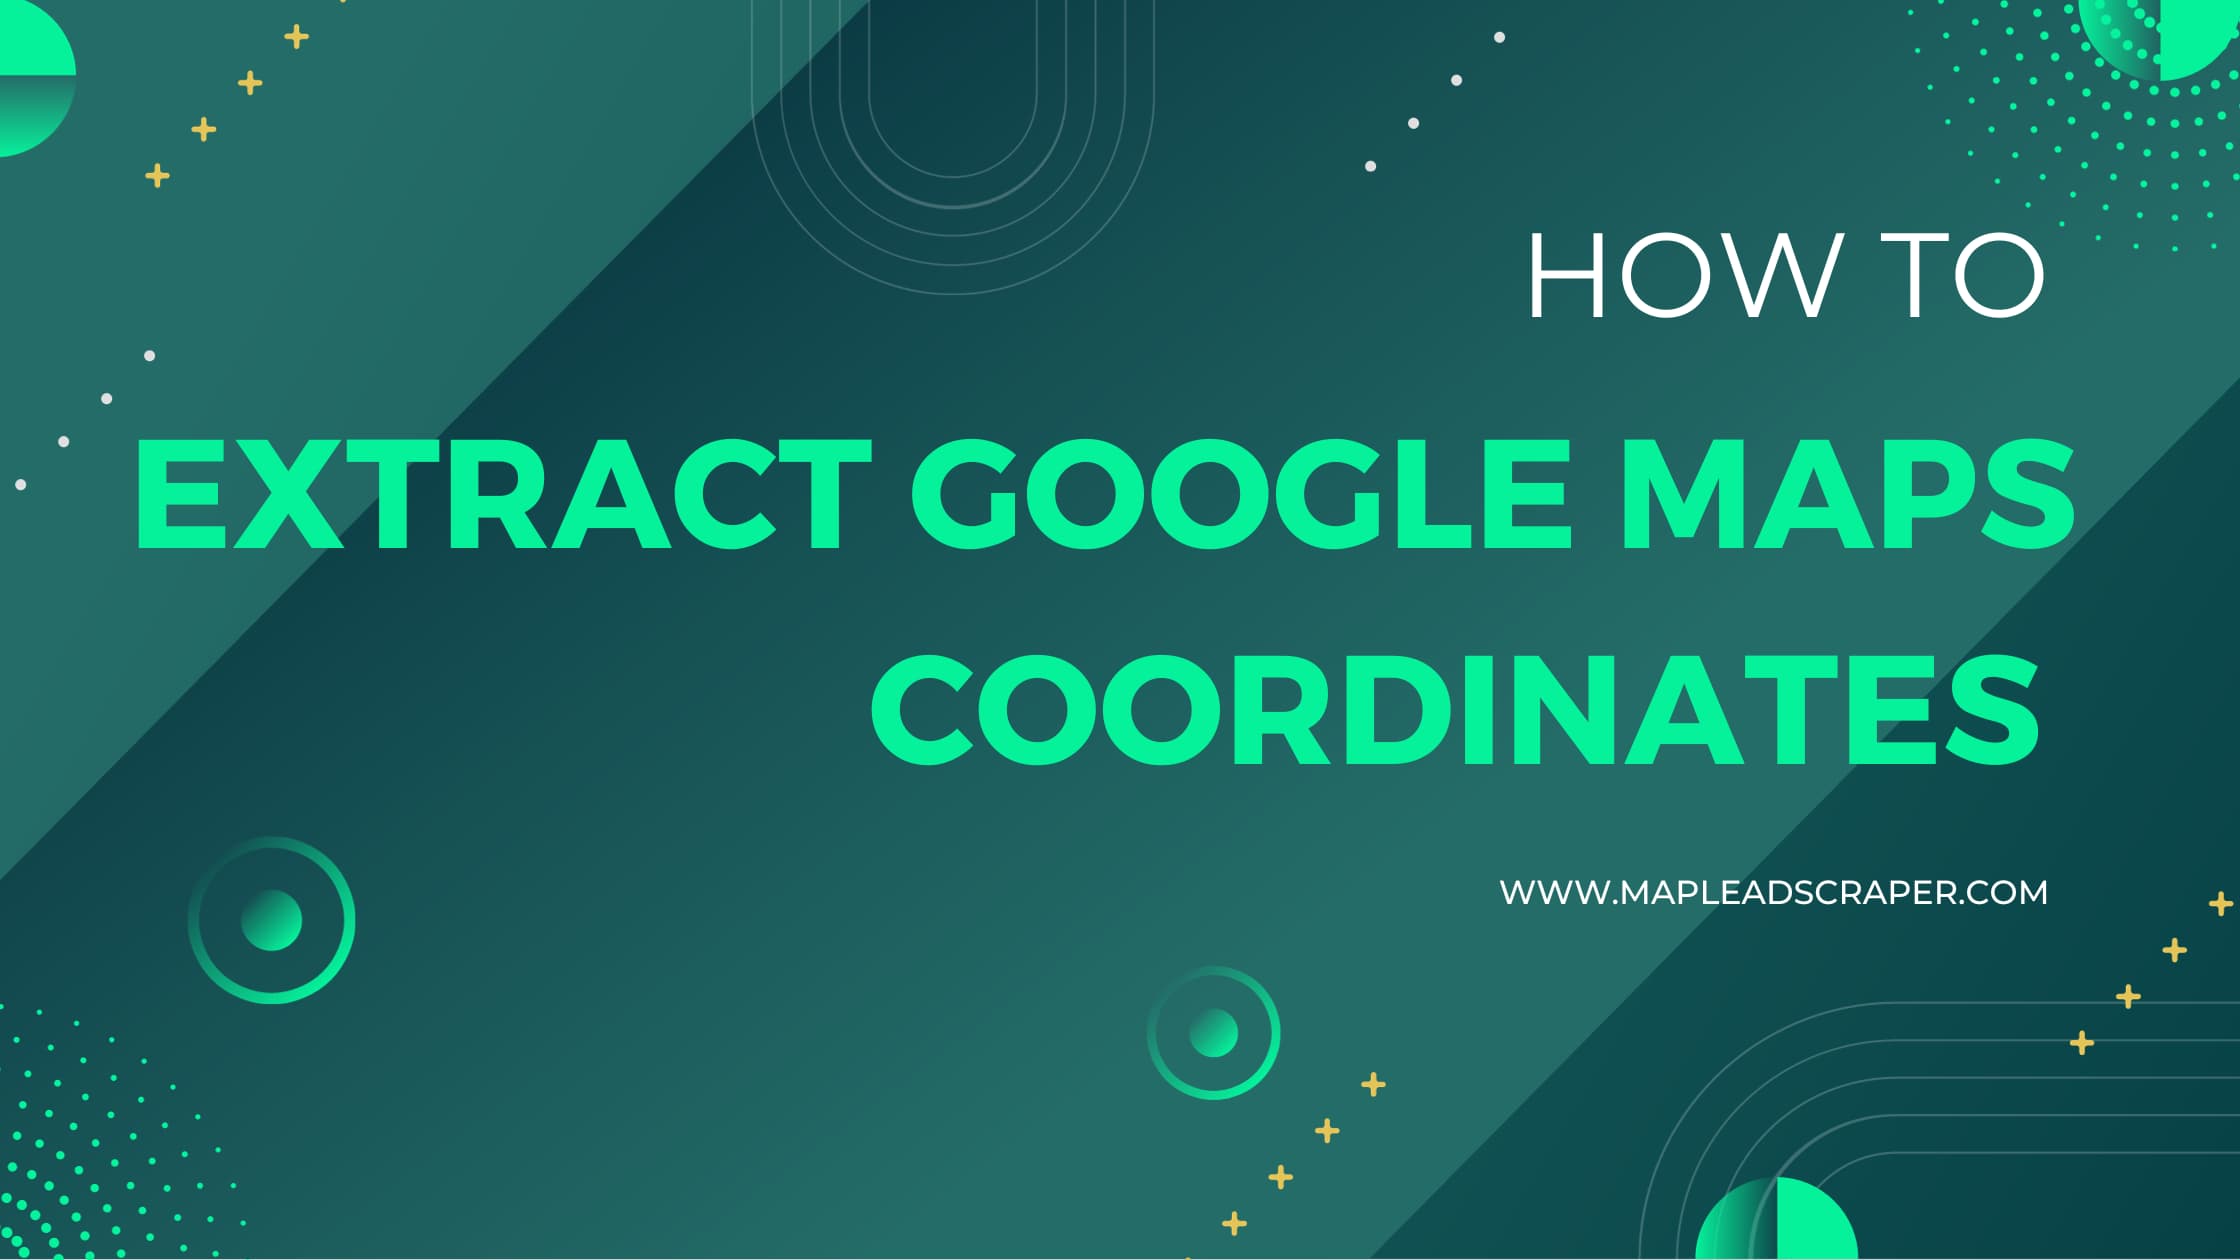 How to Extract Google Maps Coordinates Easily?